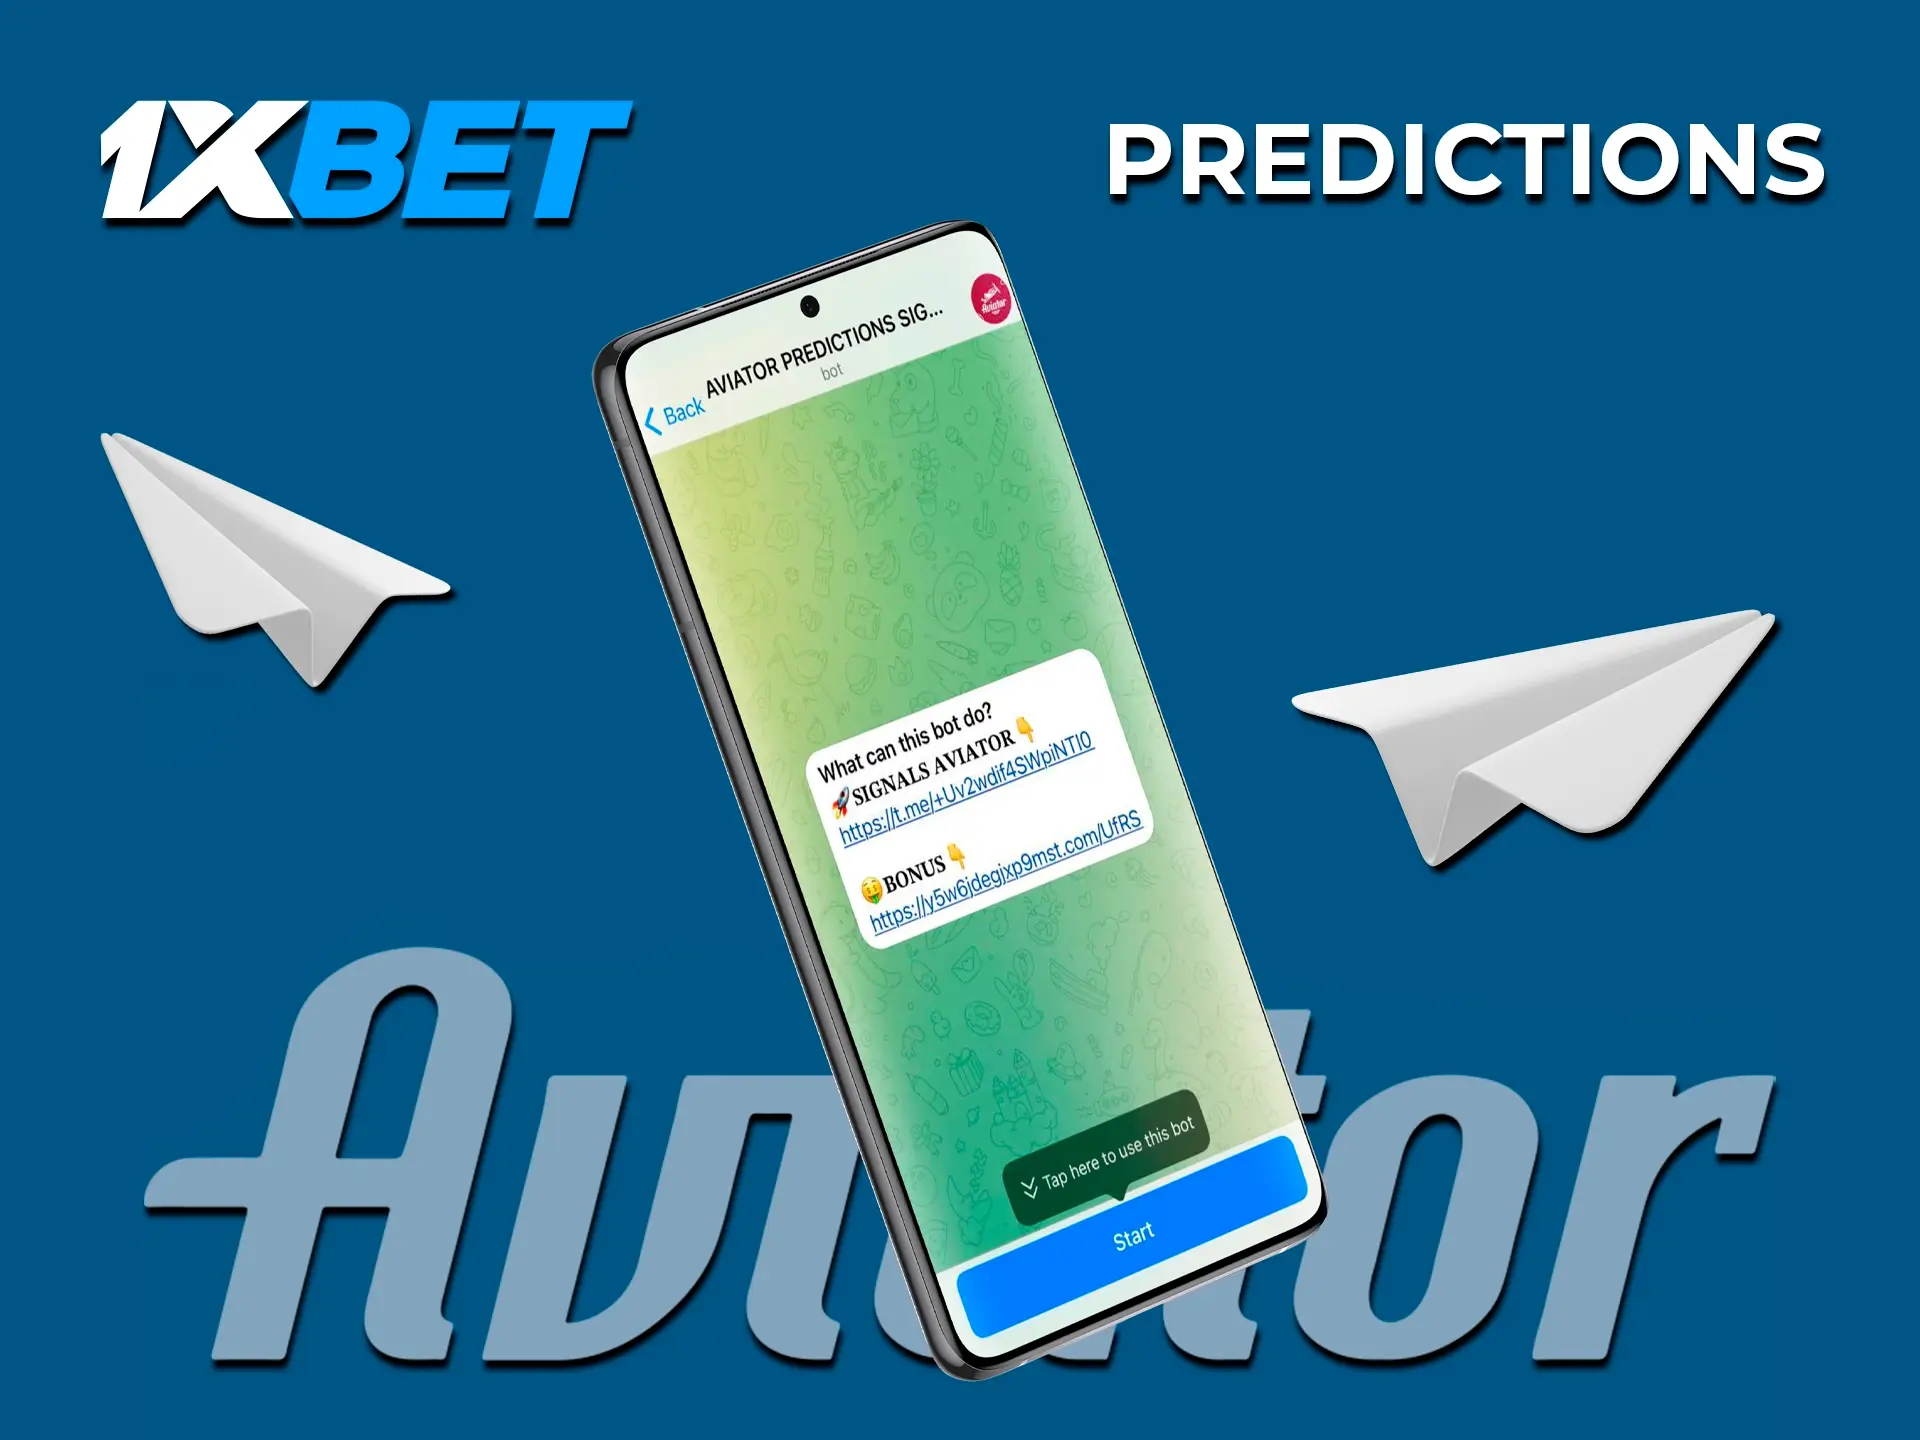 Use predictions from telegram channels to win big in Aviator game.